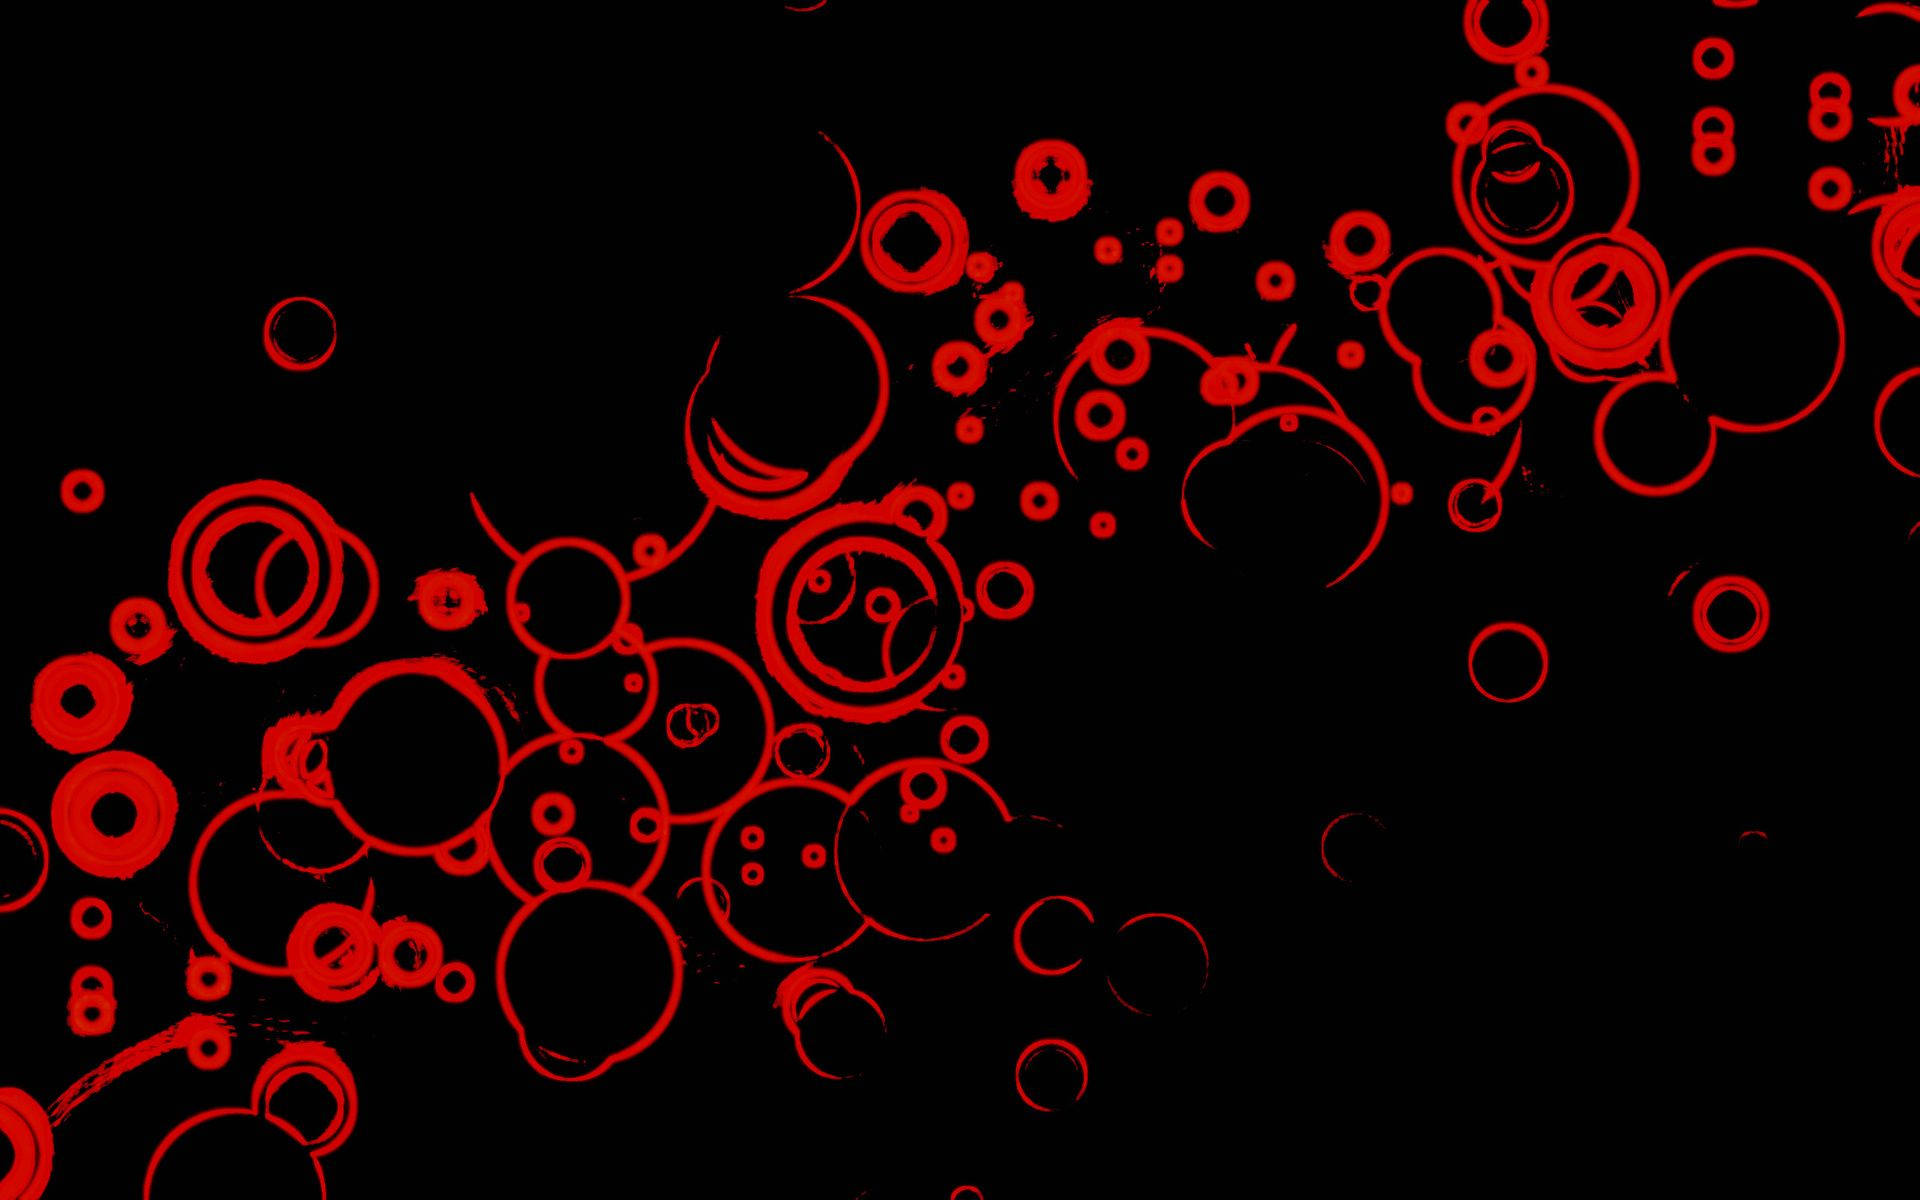 Free Red Circle Wallpaper Downloads, [100+] Red Circle Wallpapers for FREE  